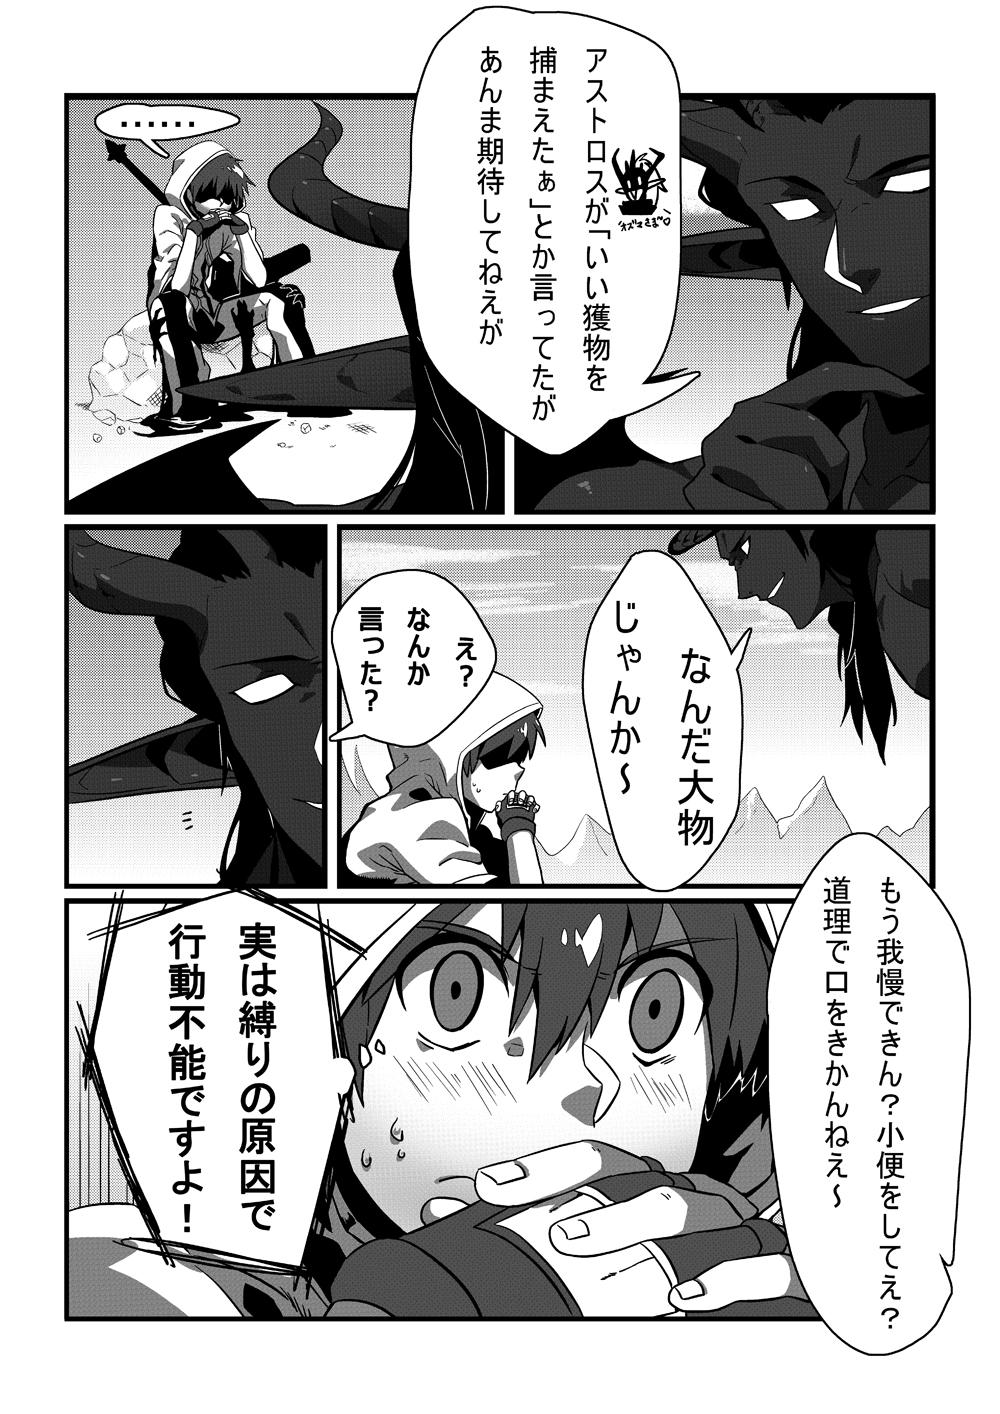 Eating Shintou - PENETRATION - Dungeon fighter online Gay Emo - Page 7